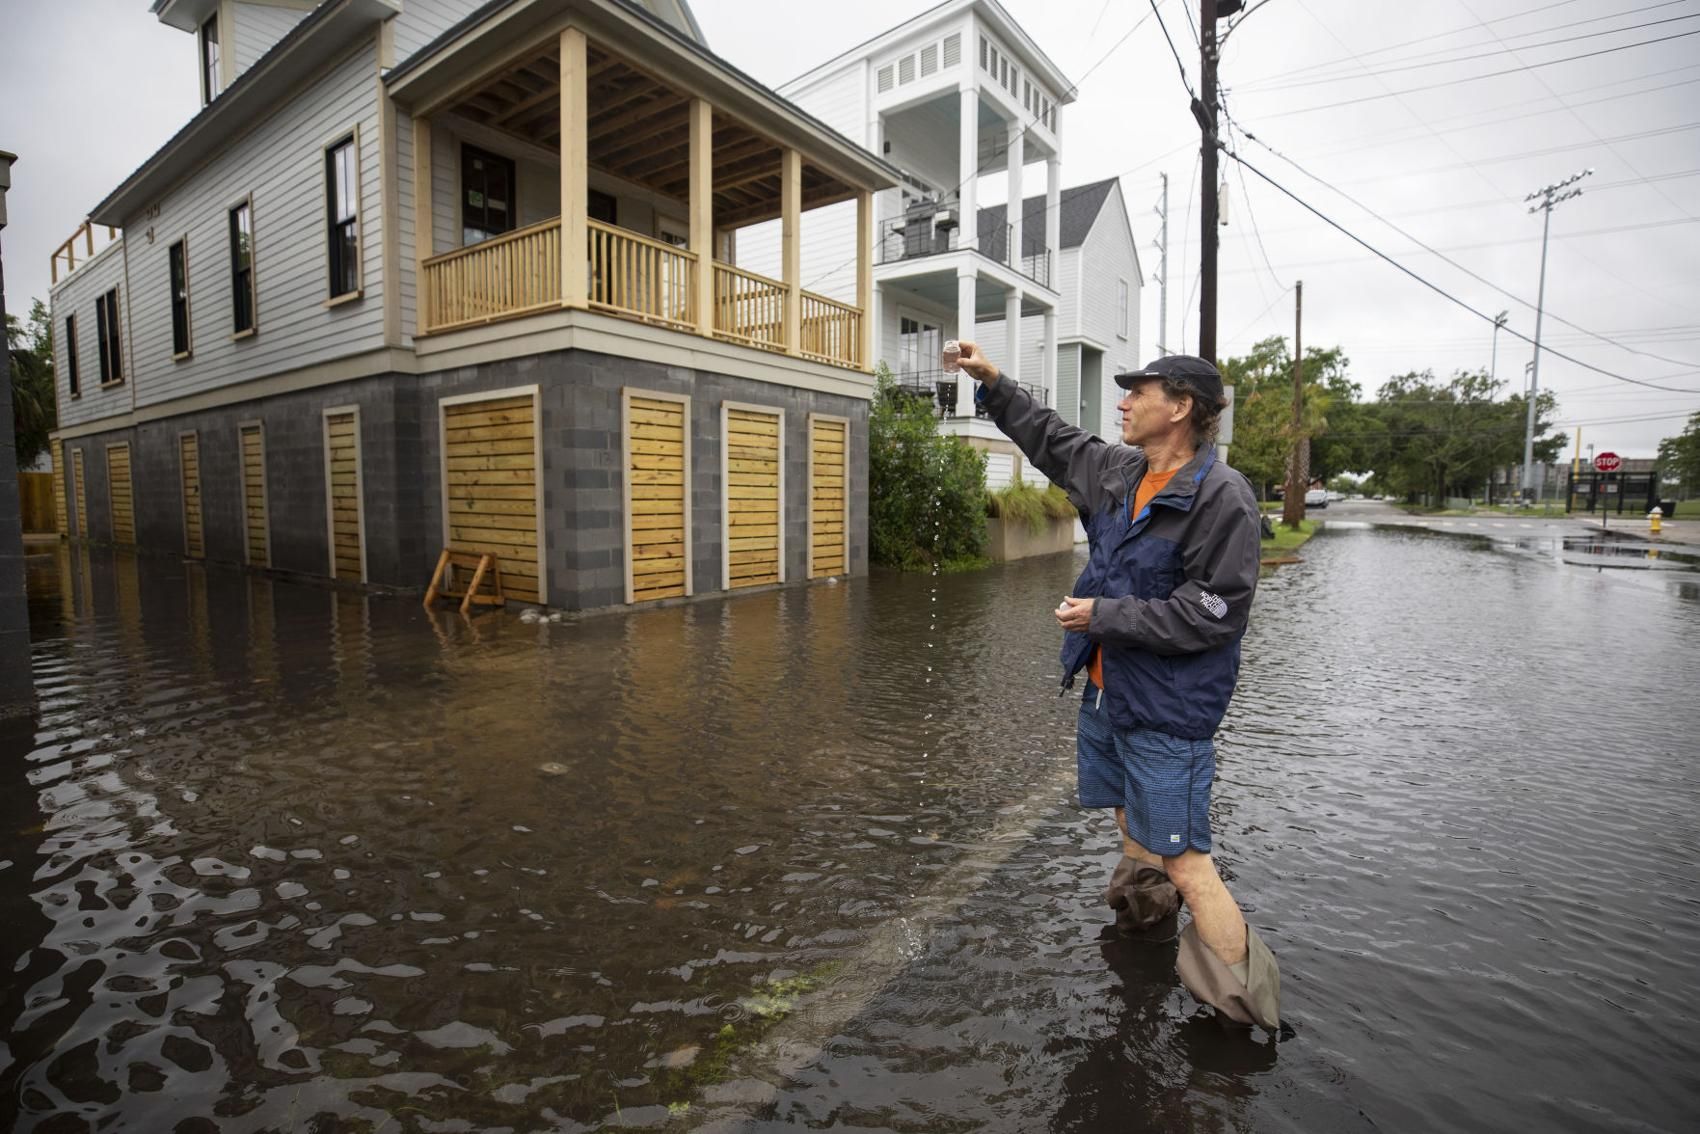 Tony Bartelme, projects reporter for The Post and Courier, collects a sample of flood water from Line Street in downtown Charleston after a heavy rain on Wednesday, May 27, 2020. Image by Lauren Petracca / Post and Courier. United States, 2020.